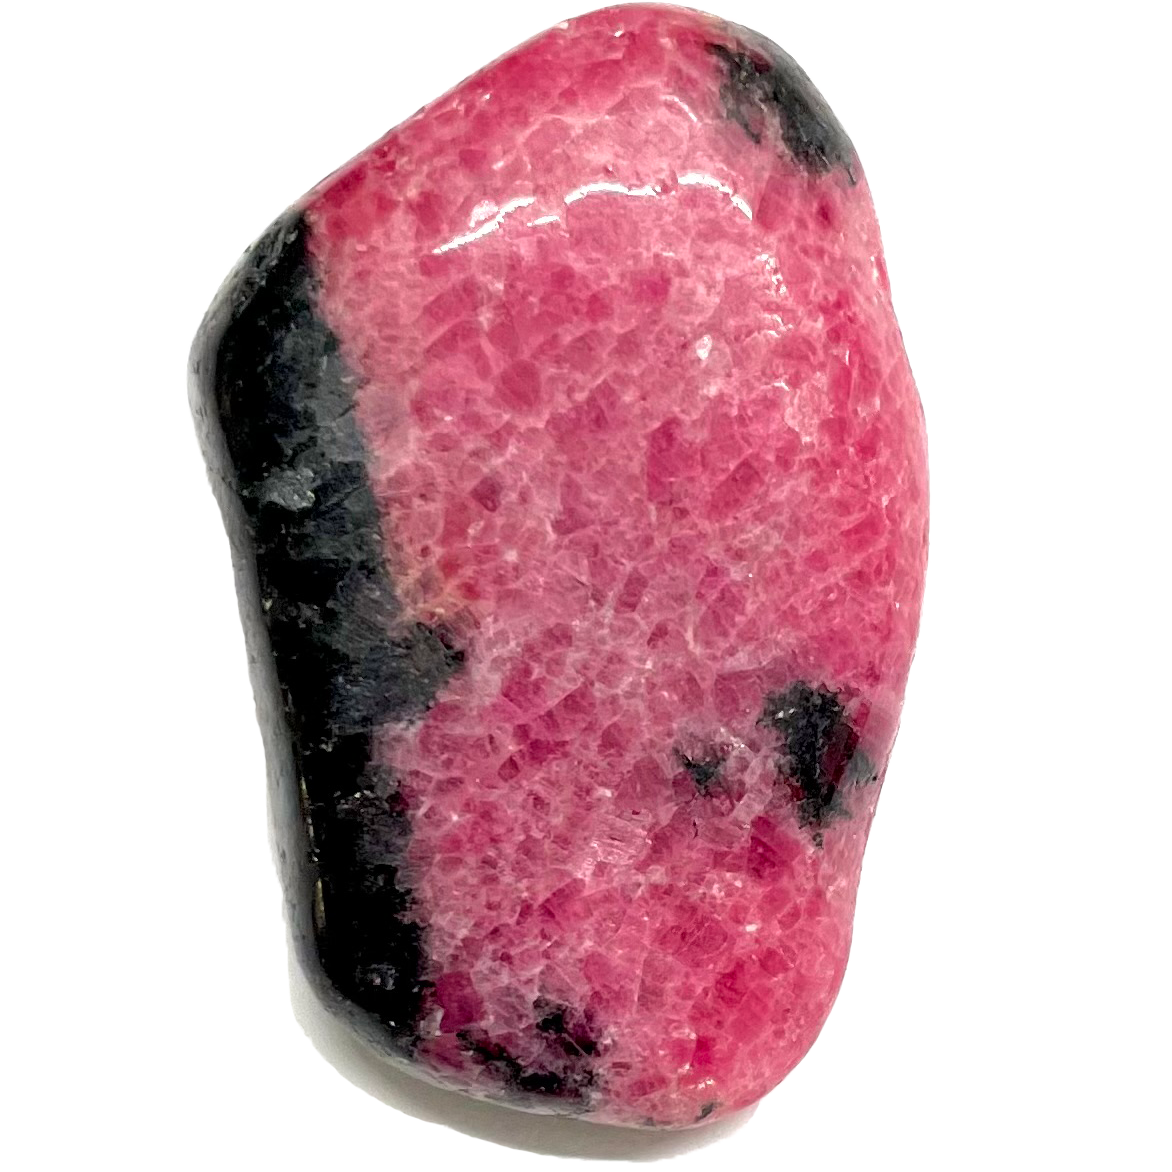 A tumbled rhodonite stone from Pakistan.  The rock is hot pink with black matrix.